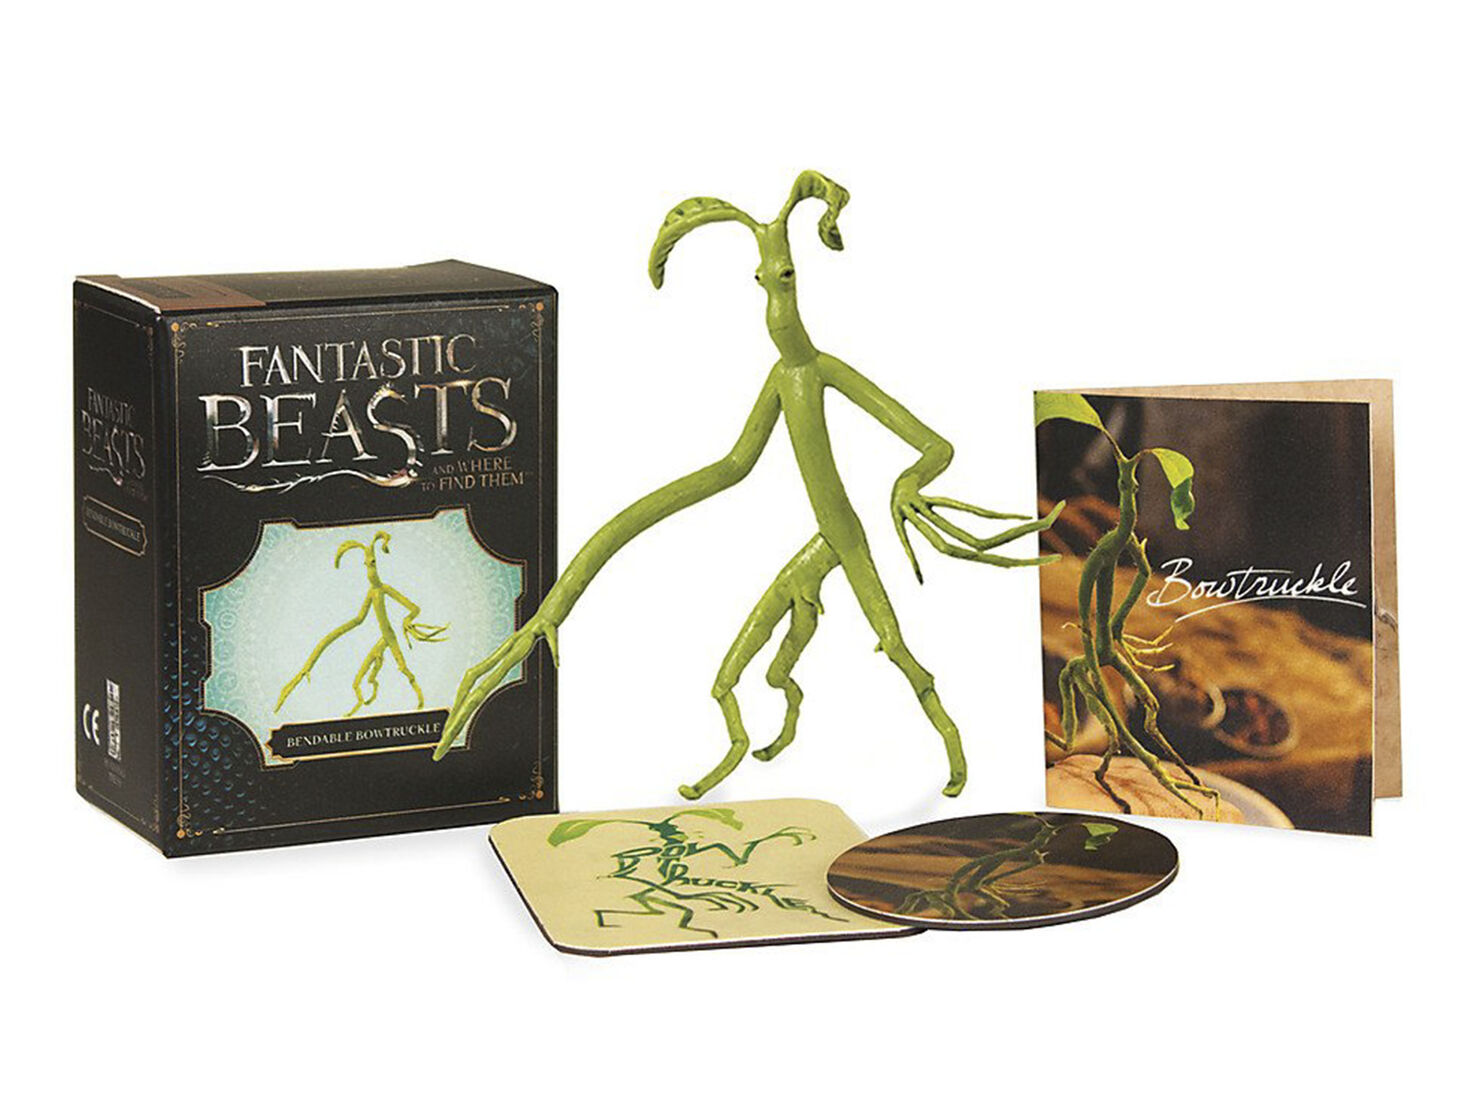 Running Press Fantastic Beasts and Where to Find Them Figuras de Acción |